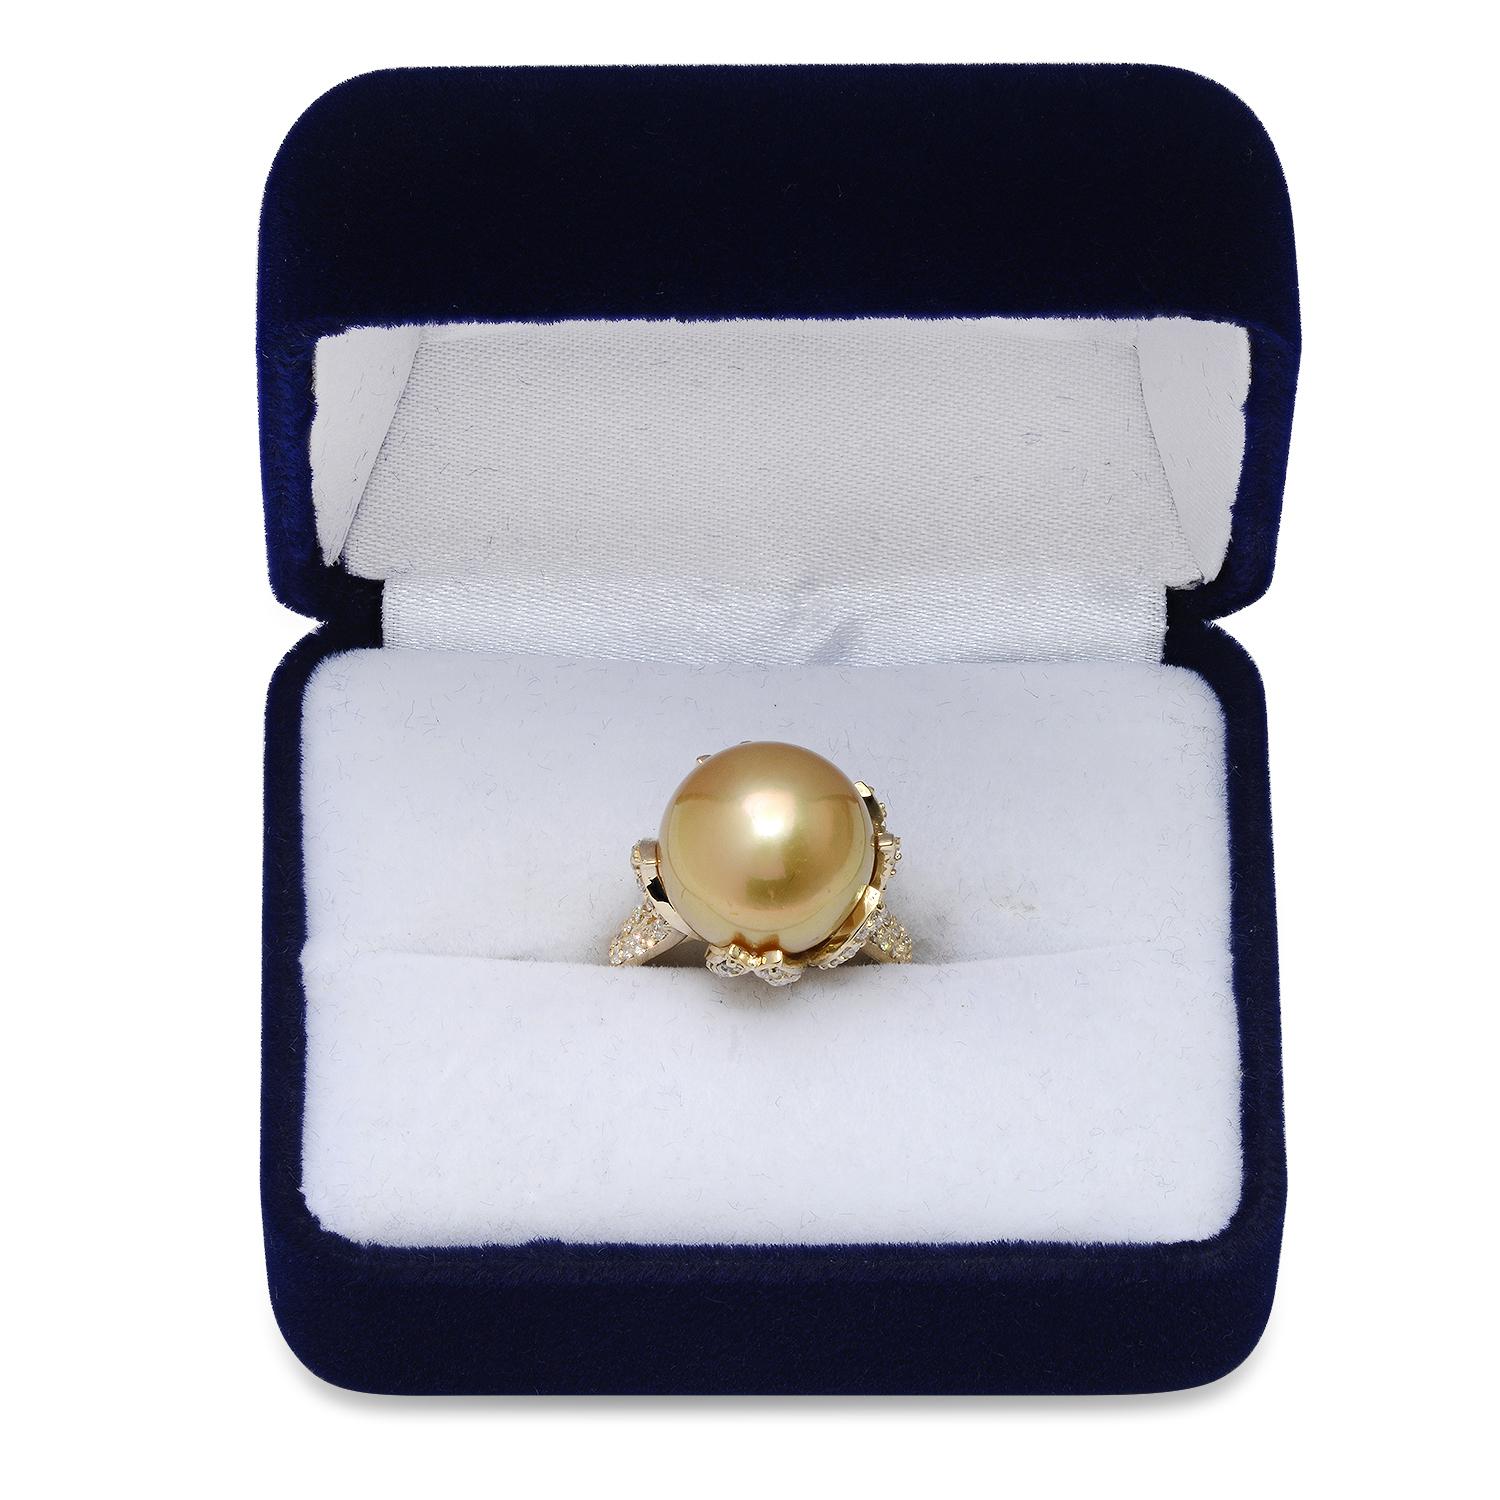 14K Yellow Gold Setting with 14mm South Sea Pearl and 0.93ct Diamond Ring